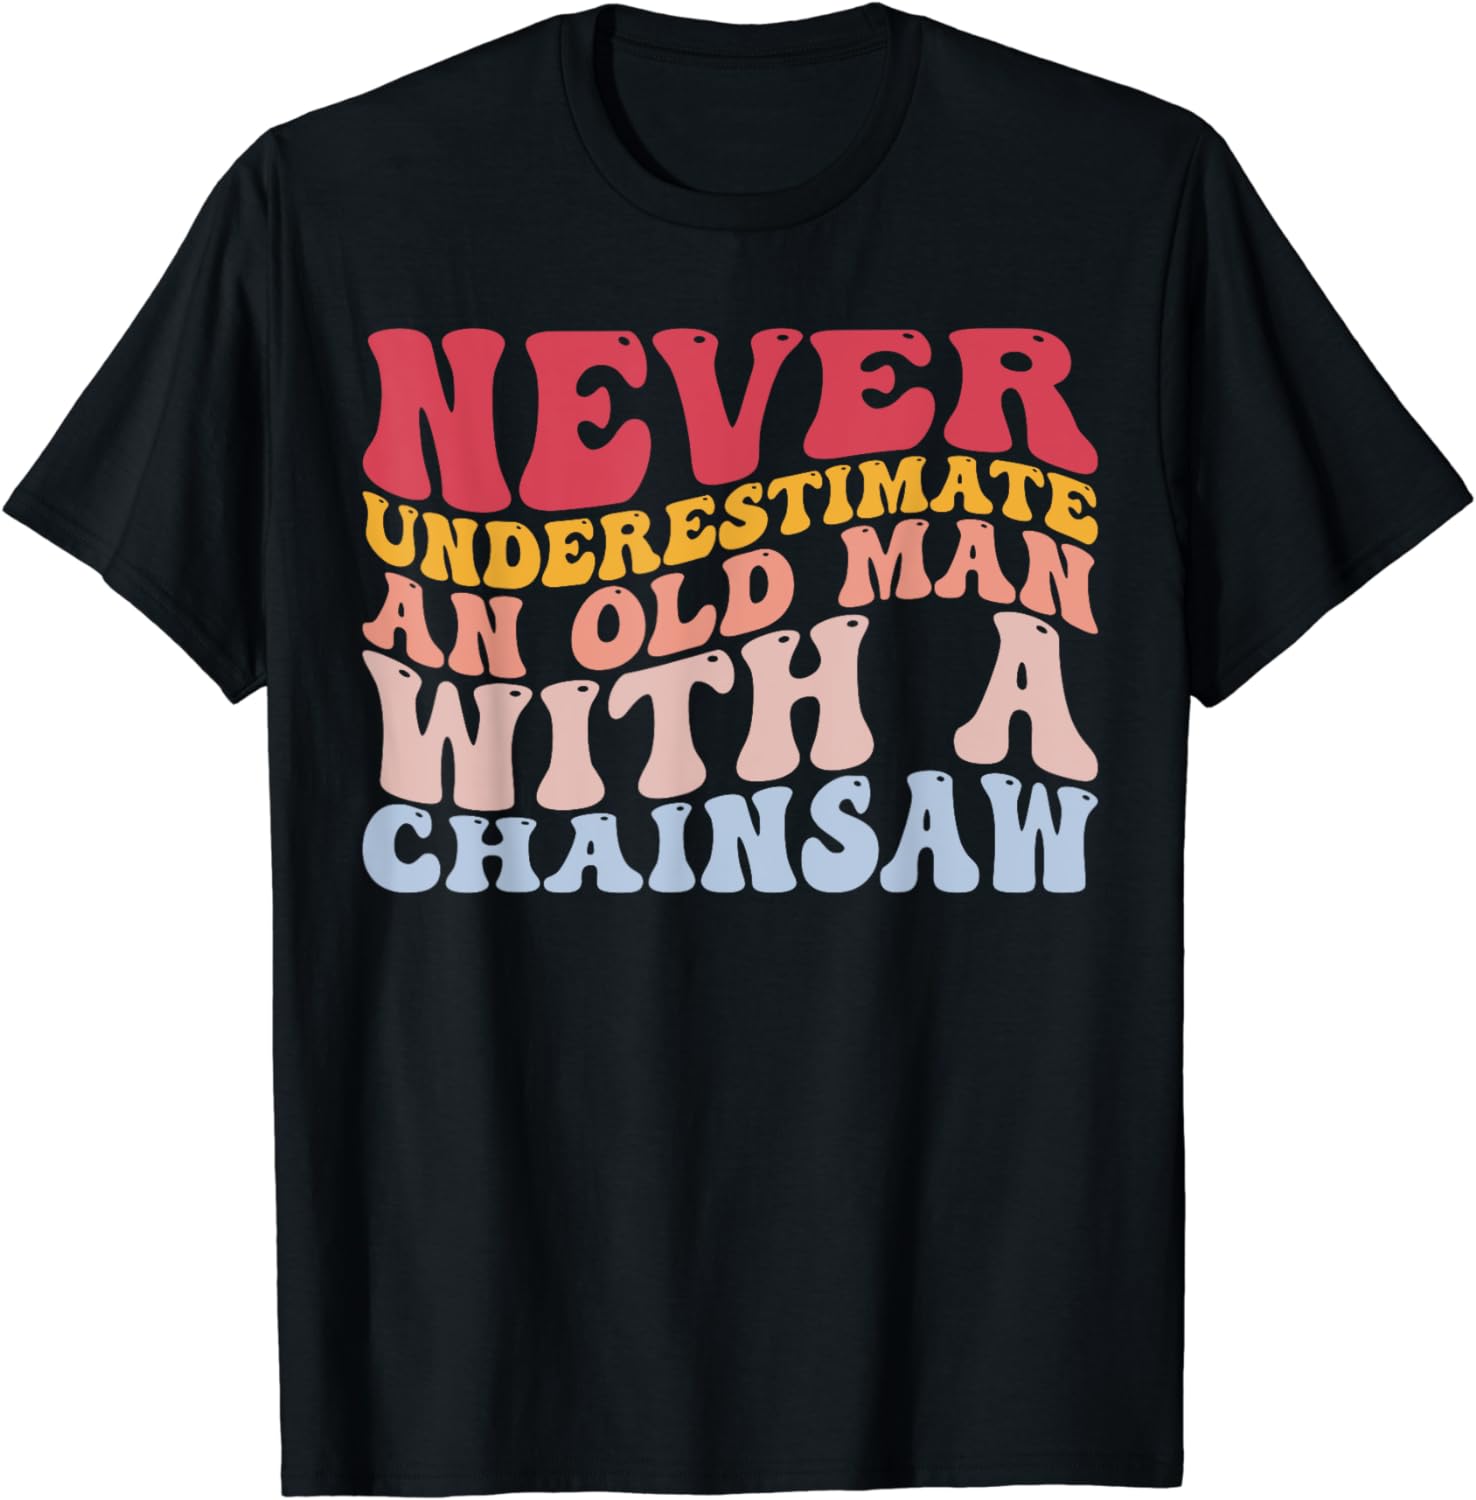 Funny Arborist Woodworking An Old Man With A Chainsaw T-Shirt - Walmart.com